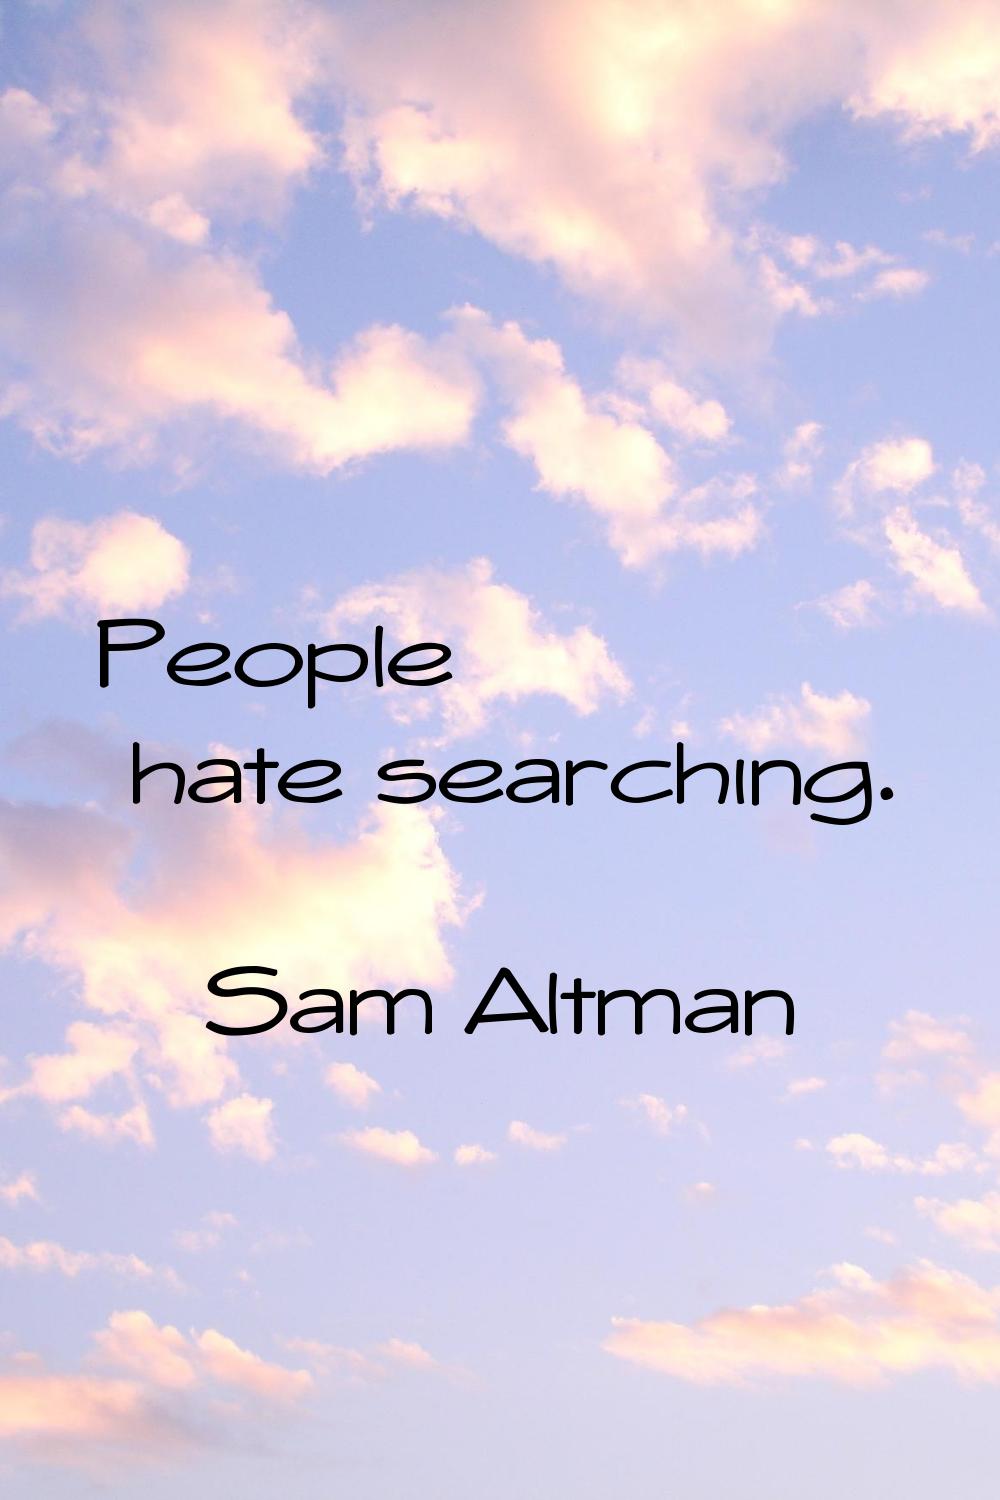 People hate searching.